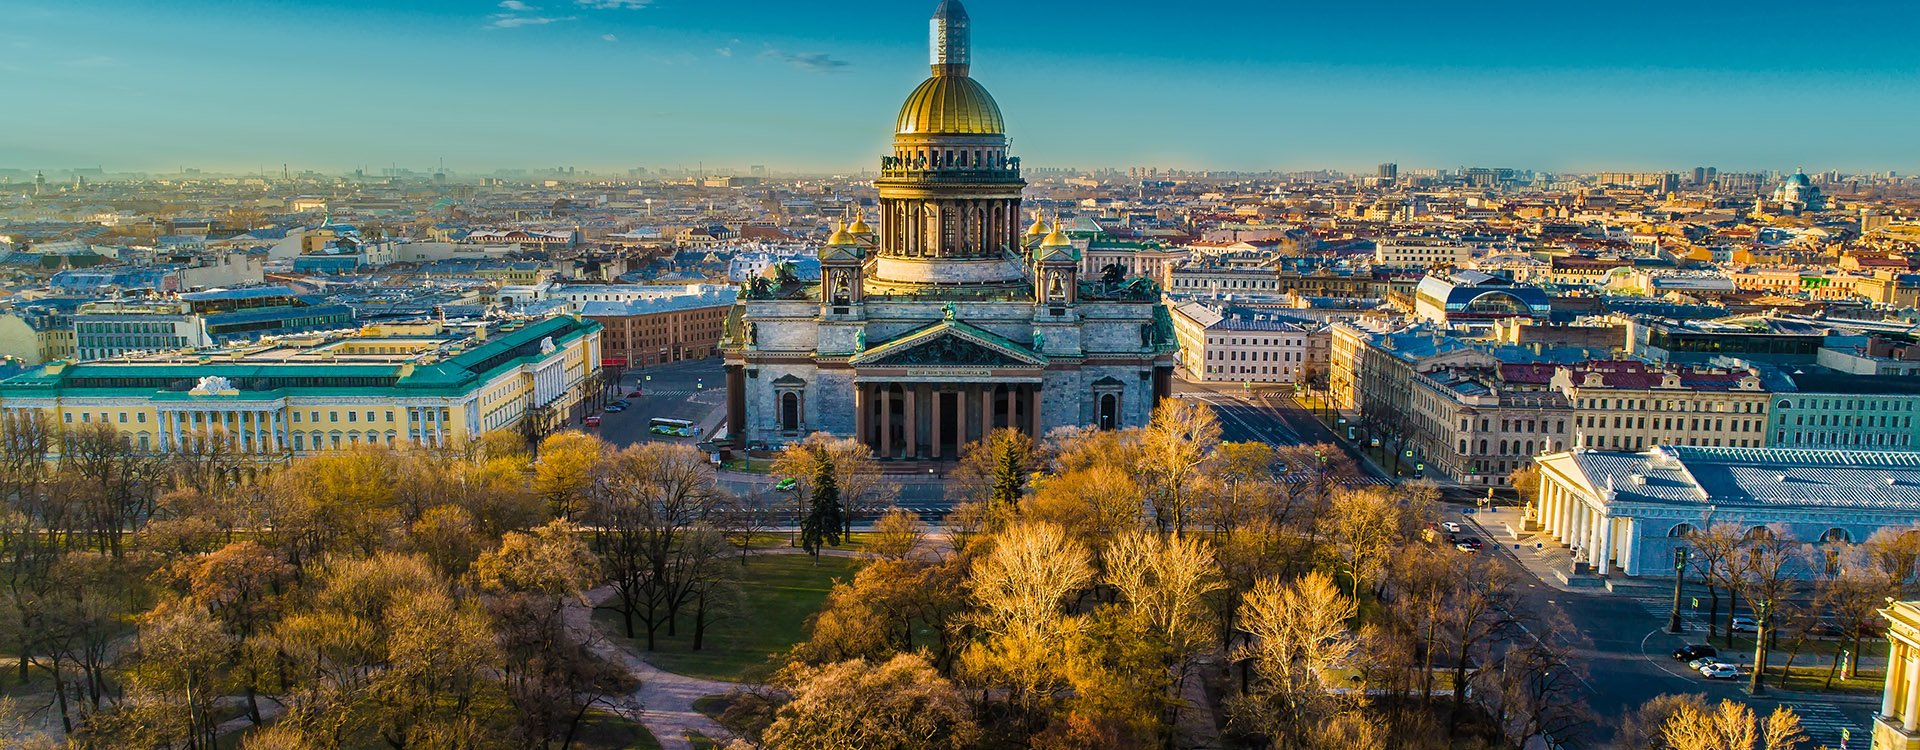 Saint Isaac's Cathedral. St. Petersburg. View from the Neva River. From the monument of Peter the Great